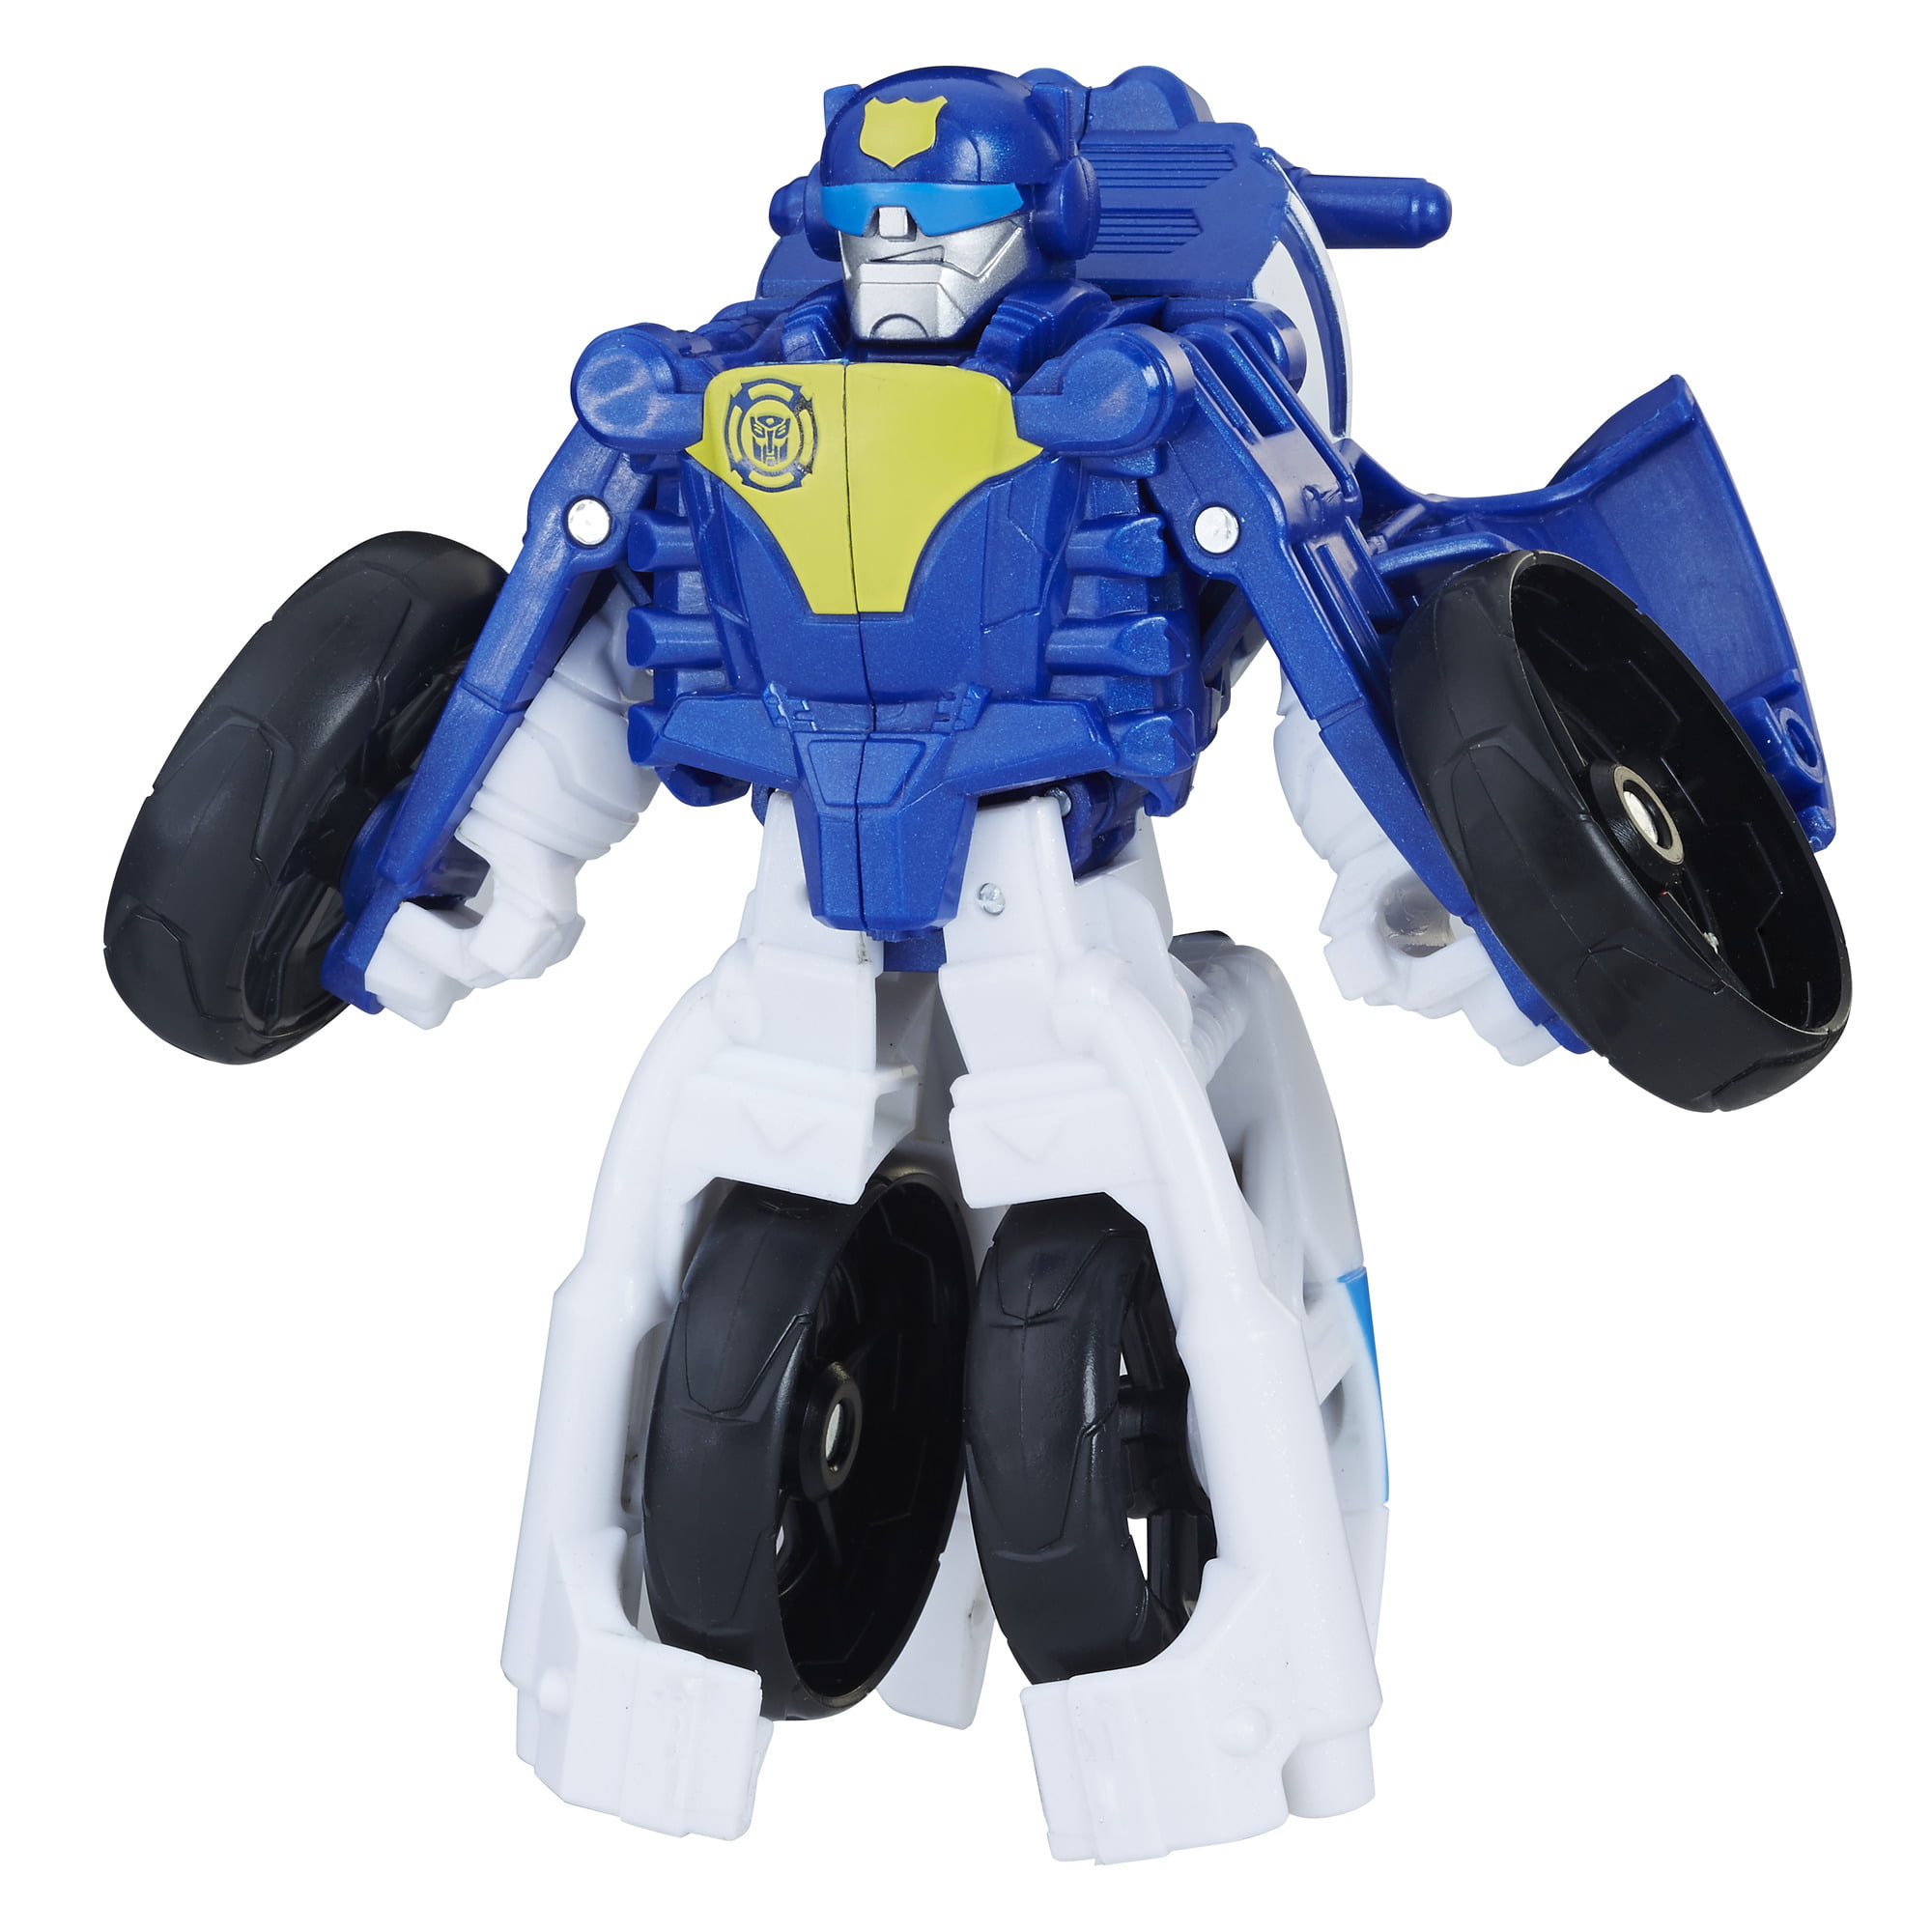 Details about   Playskool Heroes Transformers Rescue Bots Energize Chase the Police-Bot Actio... 